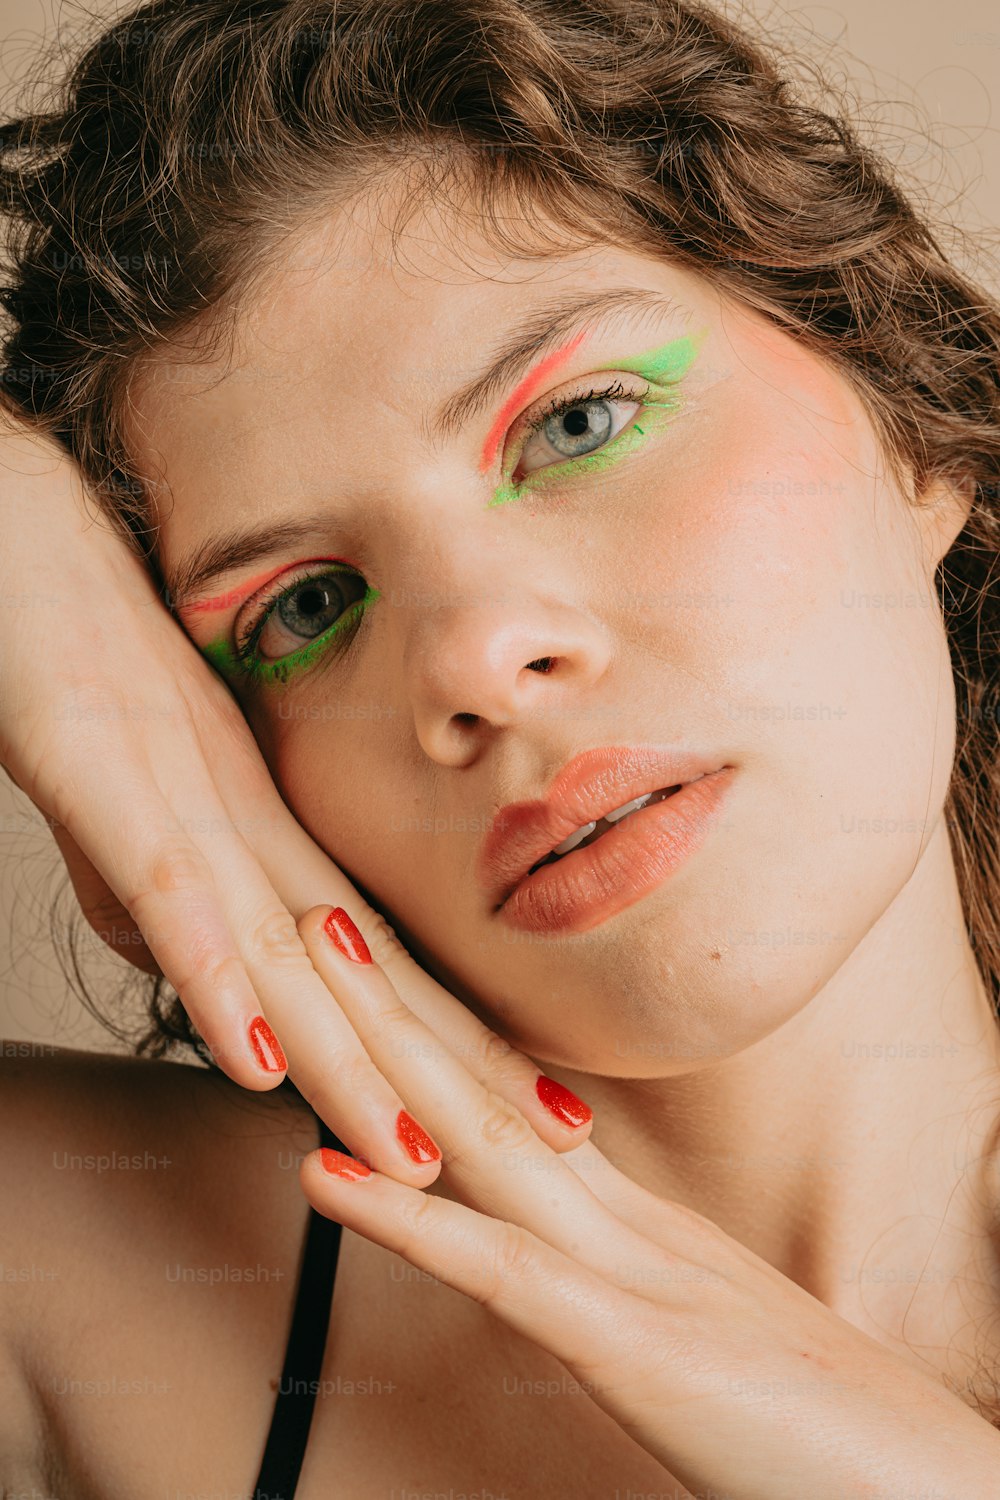 a woman with green and red makeup posing for a picture